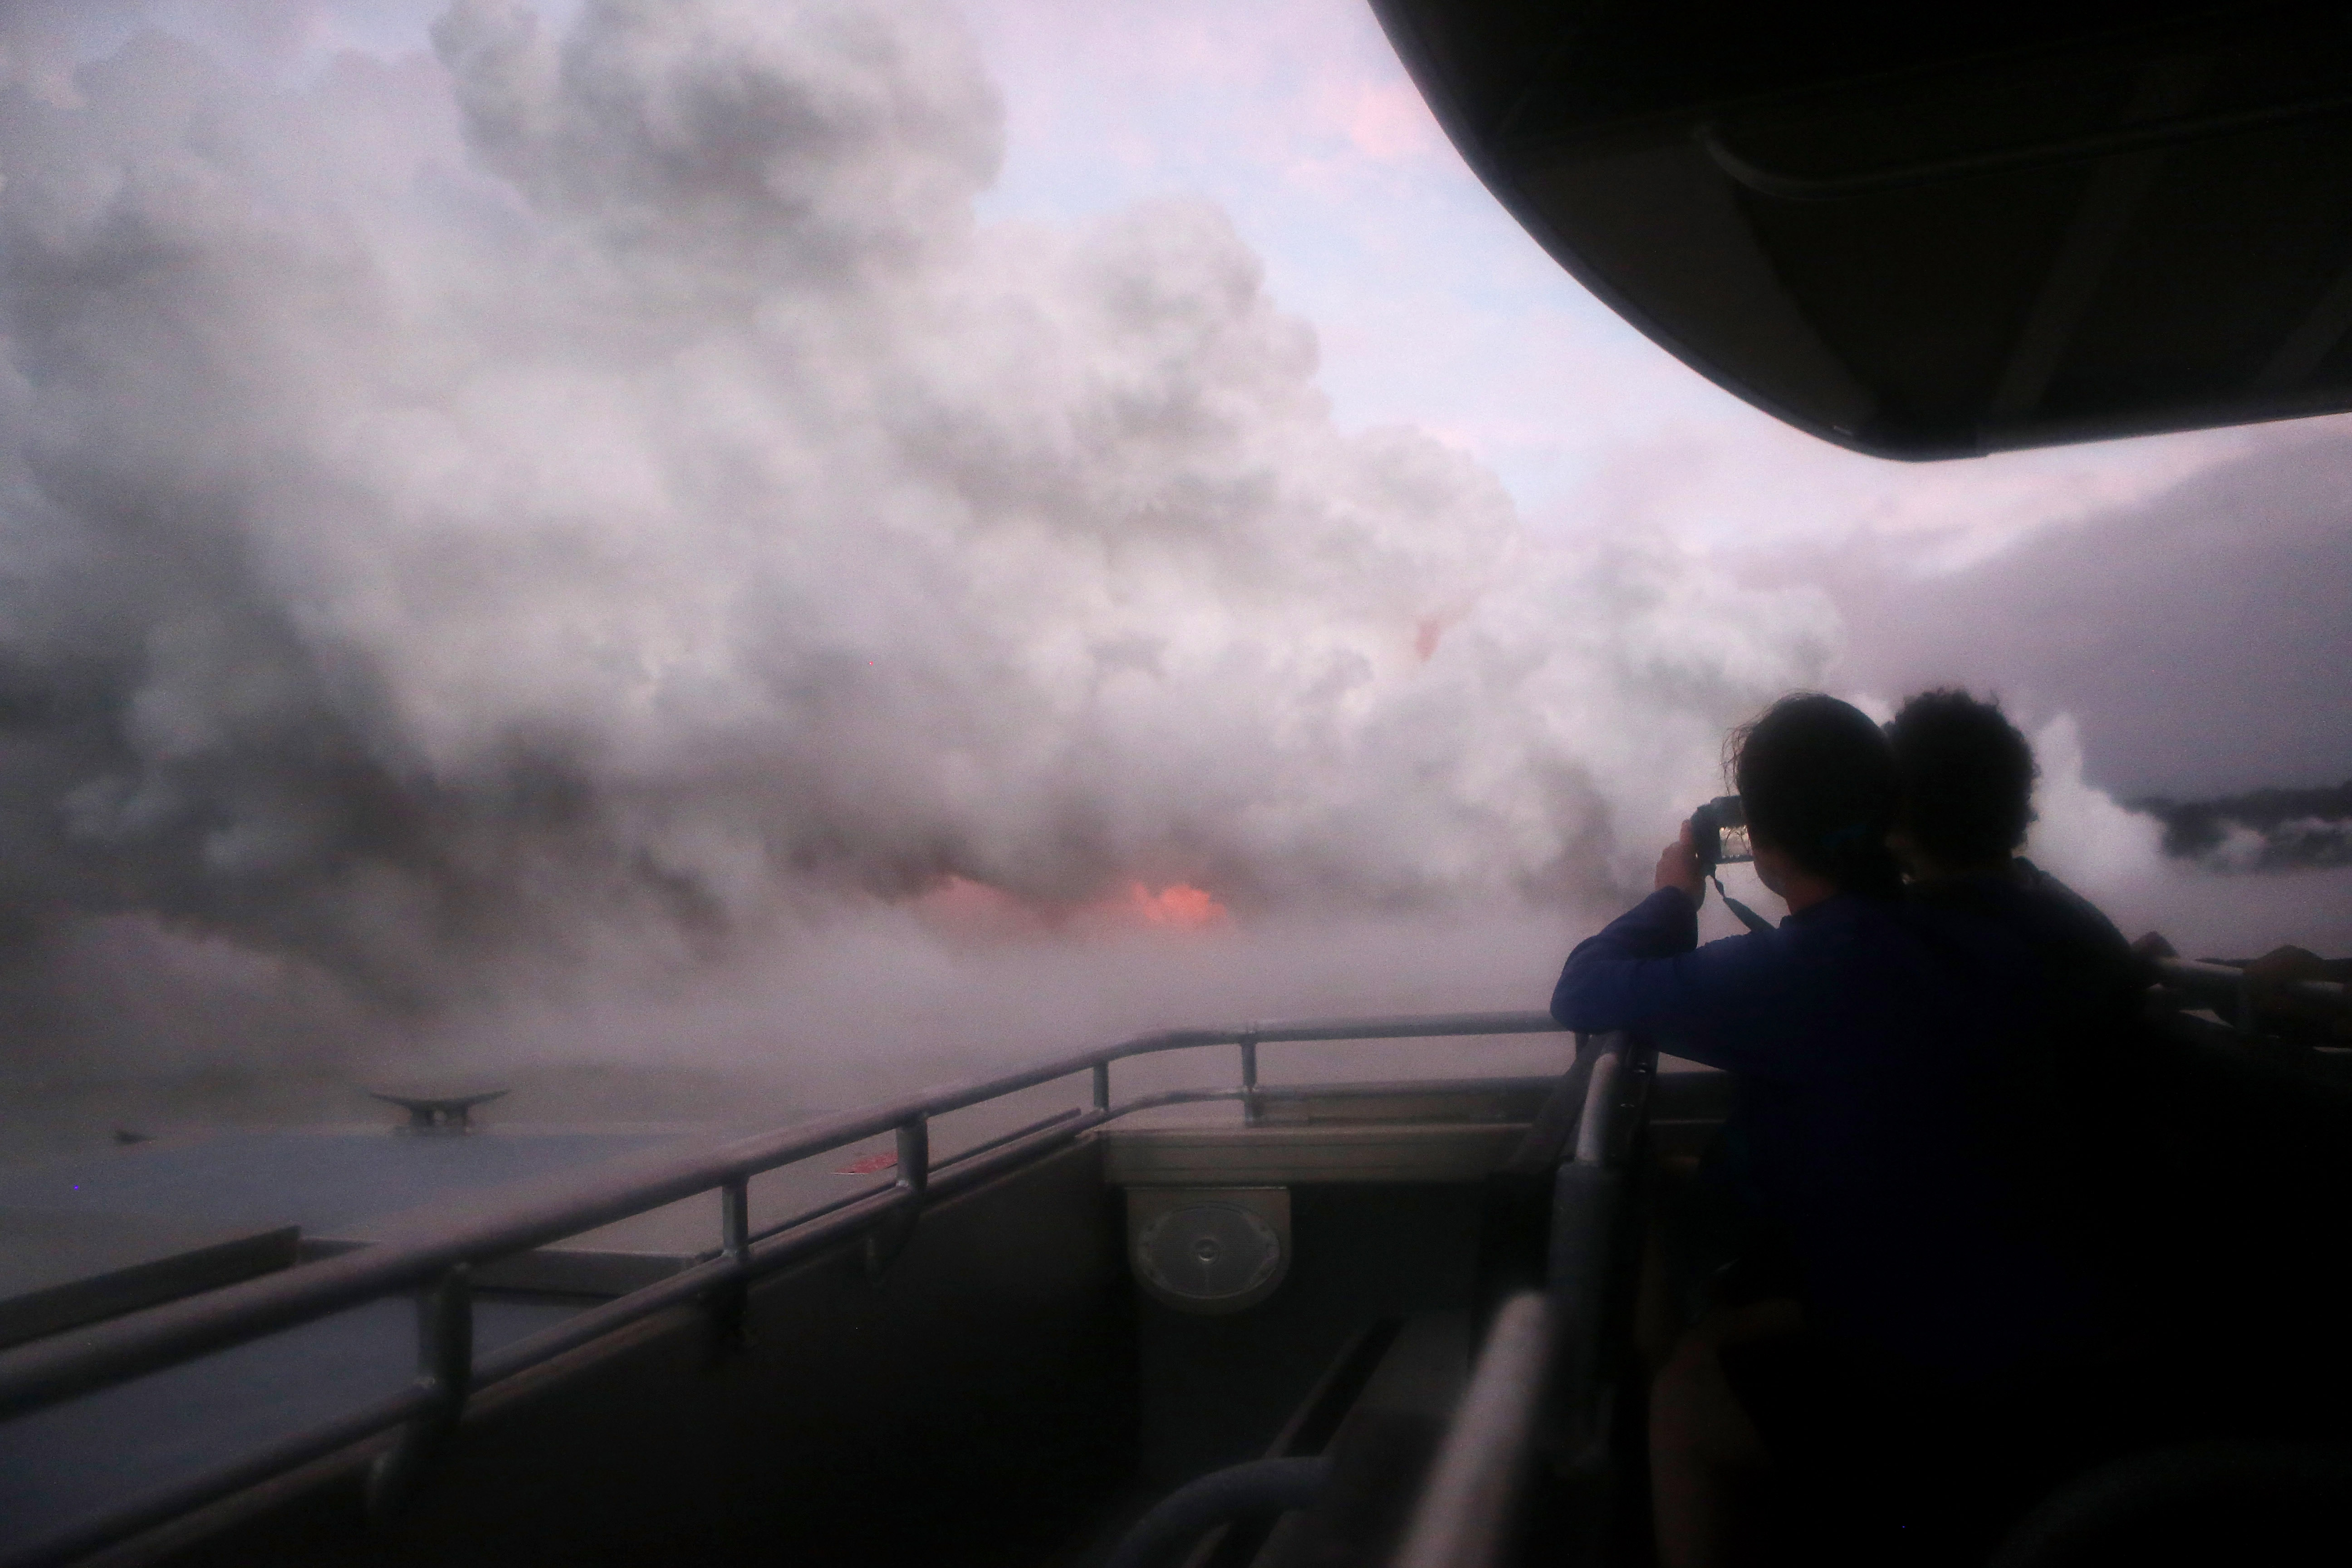 23 People Injured After Lava Bomb Tears Through Roof Of Boat In Hawaii